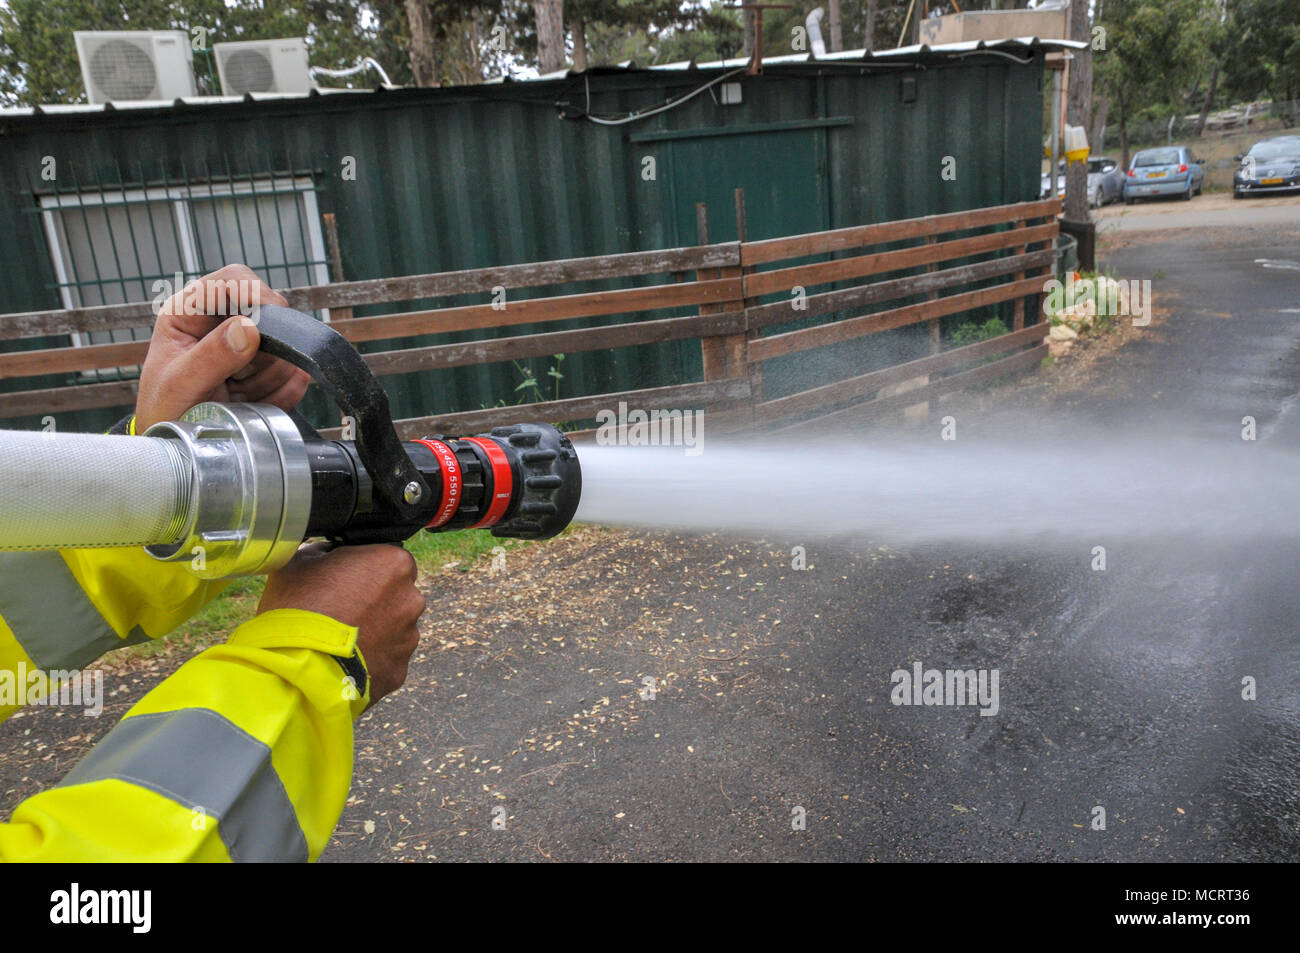 Fireman in protective clothing extinguishes a fire as part of a fire fighting drill Stock Photo